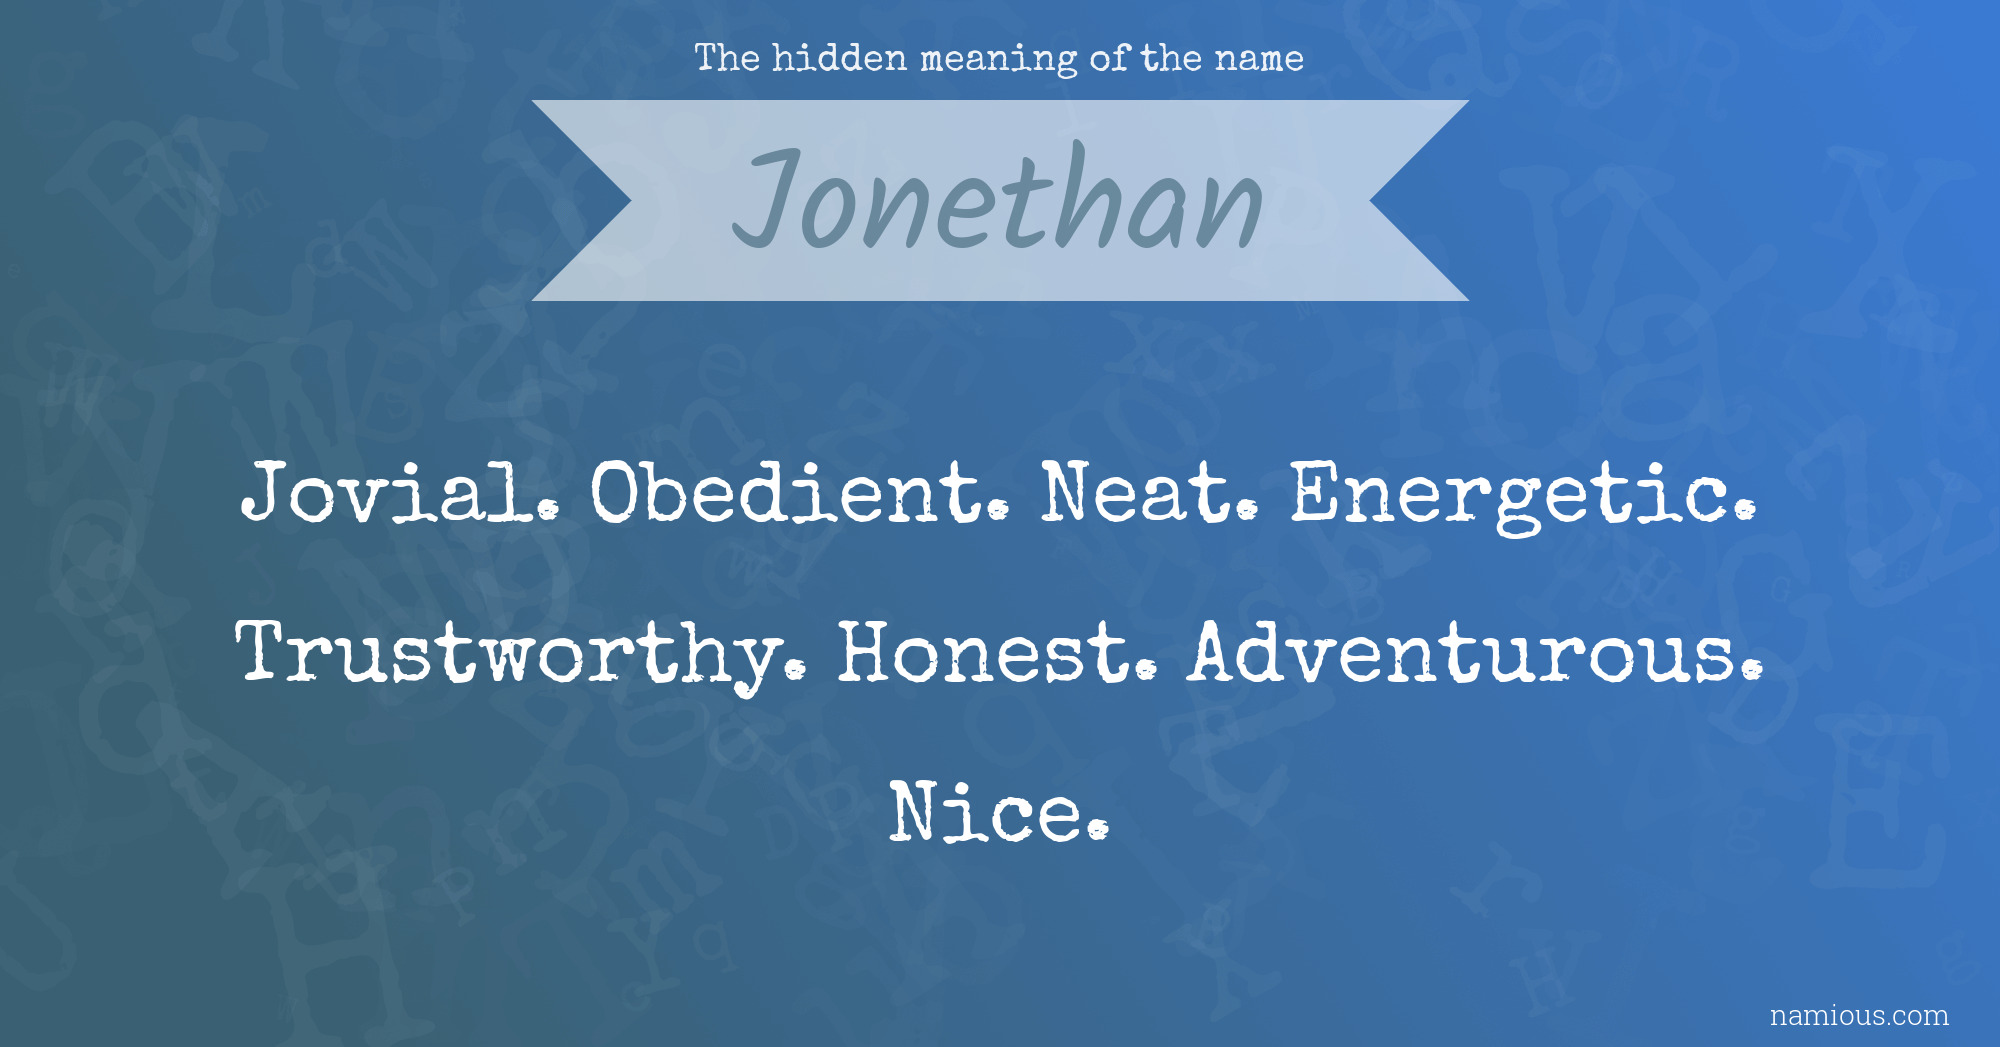 The hidden meaning of the name Jonethan